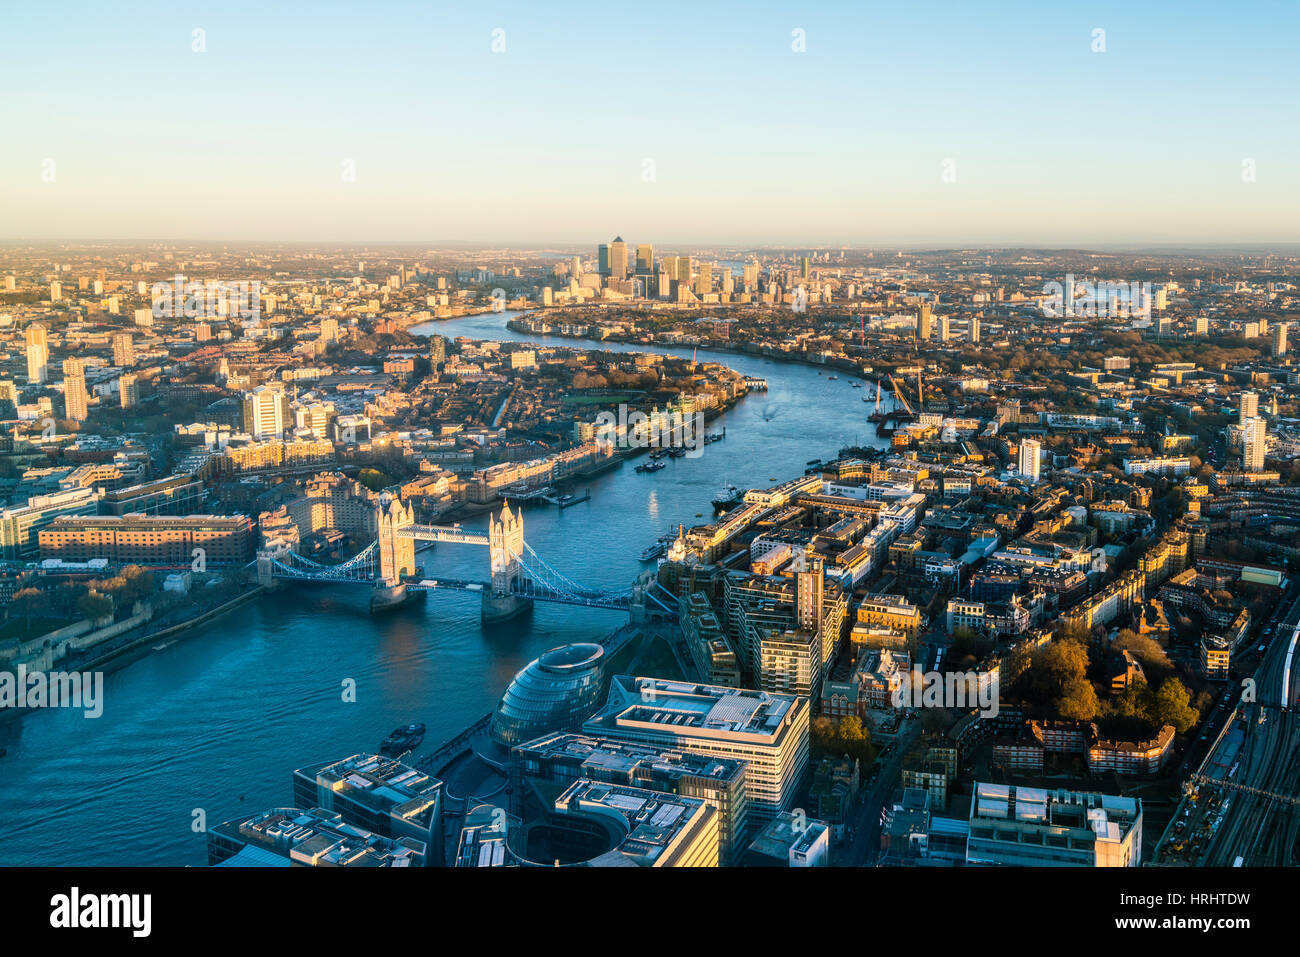 High view of London skyline along the River Thames from Tower Bridge to Canary Wharf, London, England, United Kingdom Stock Photo